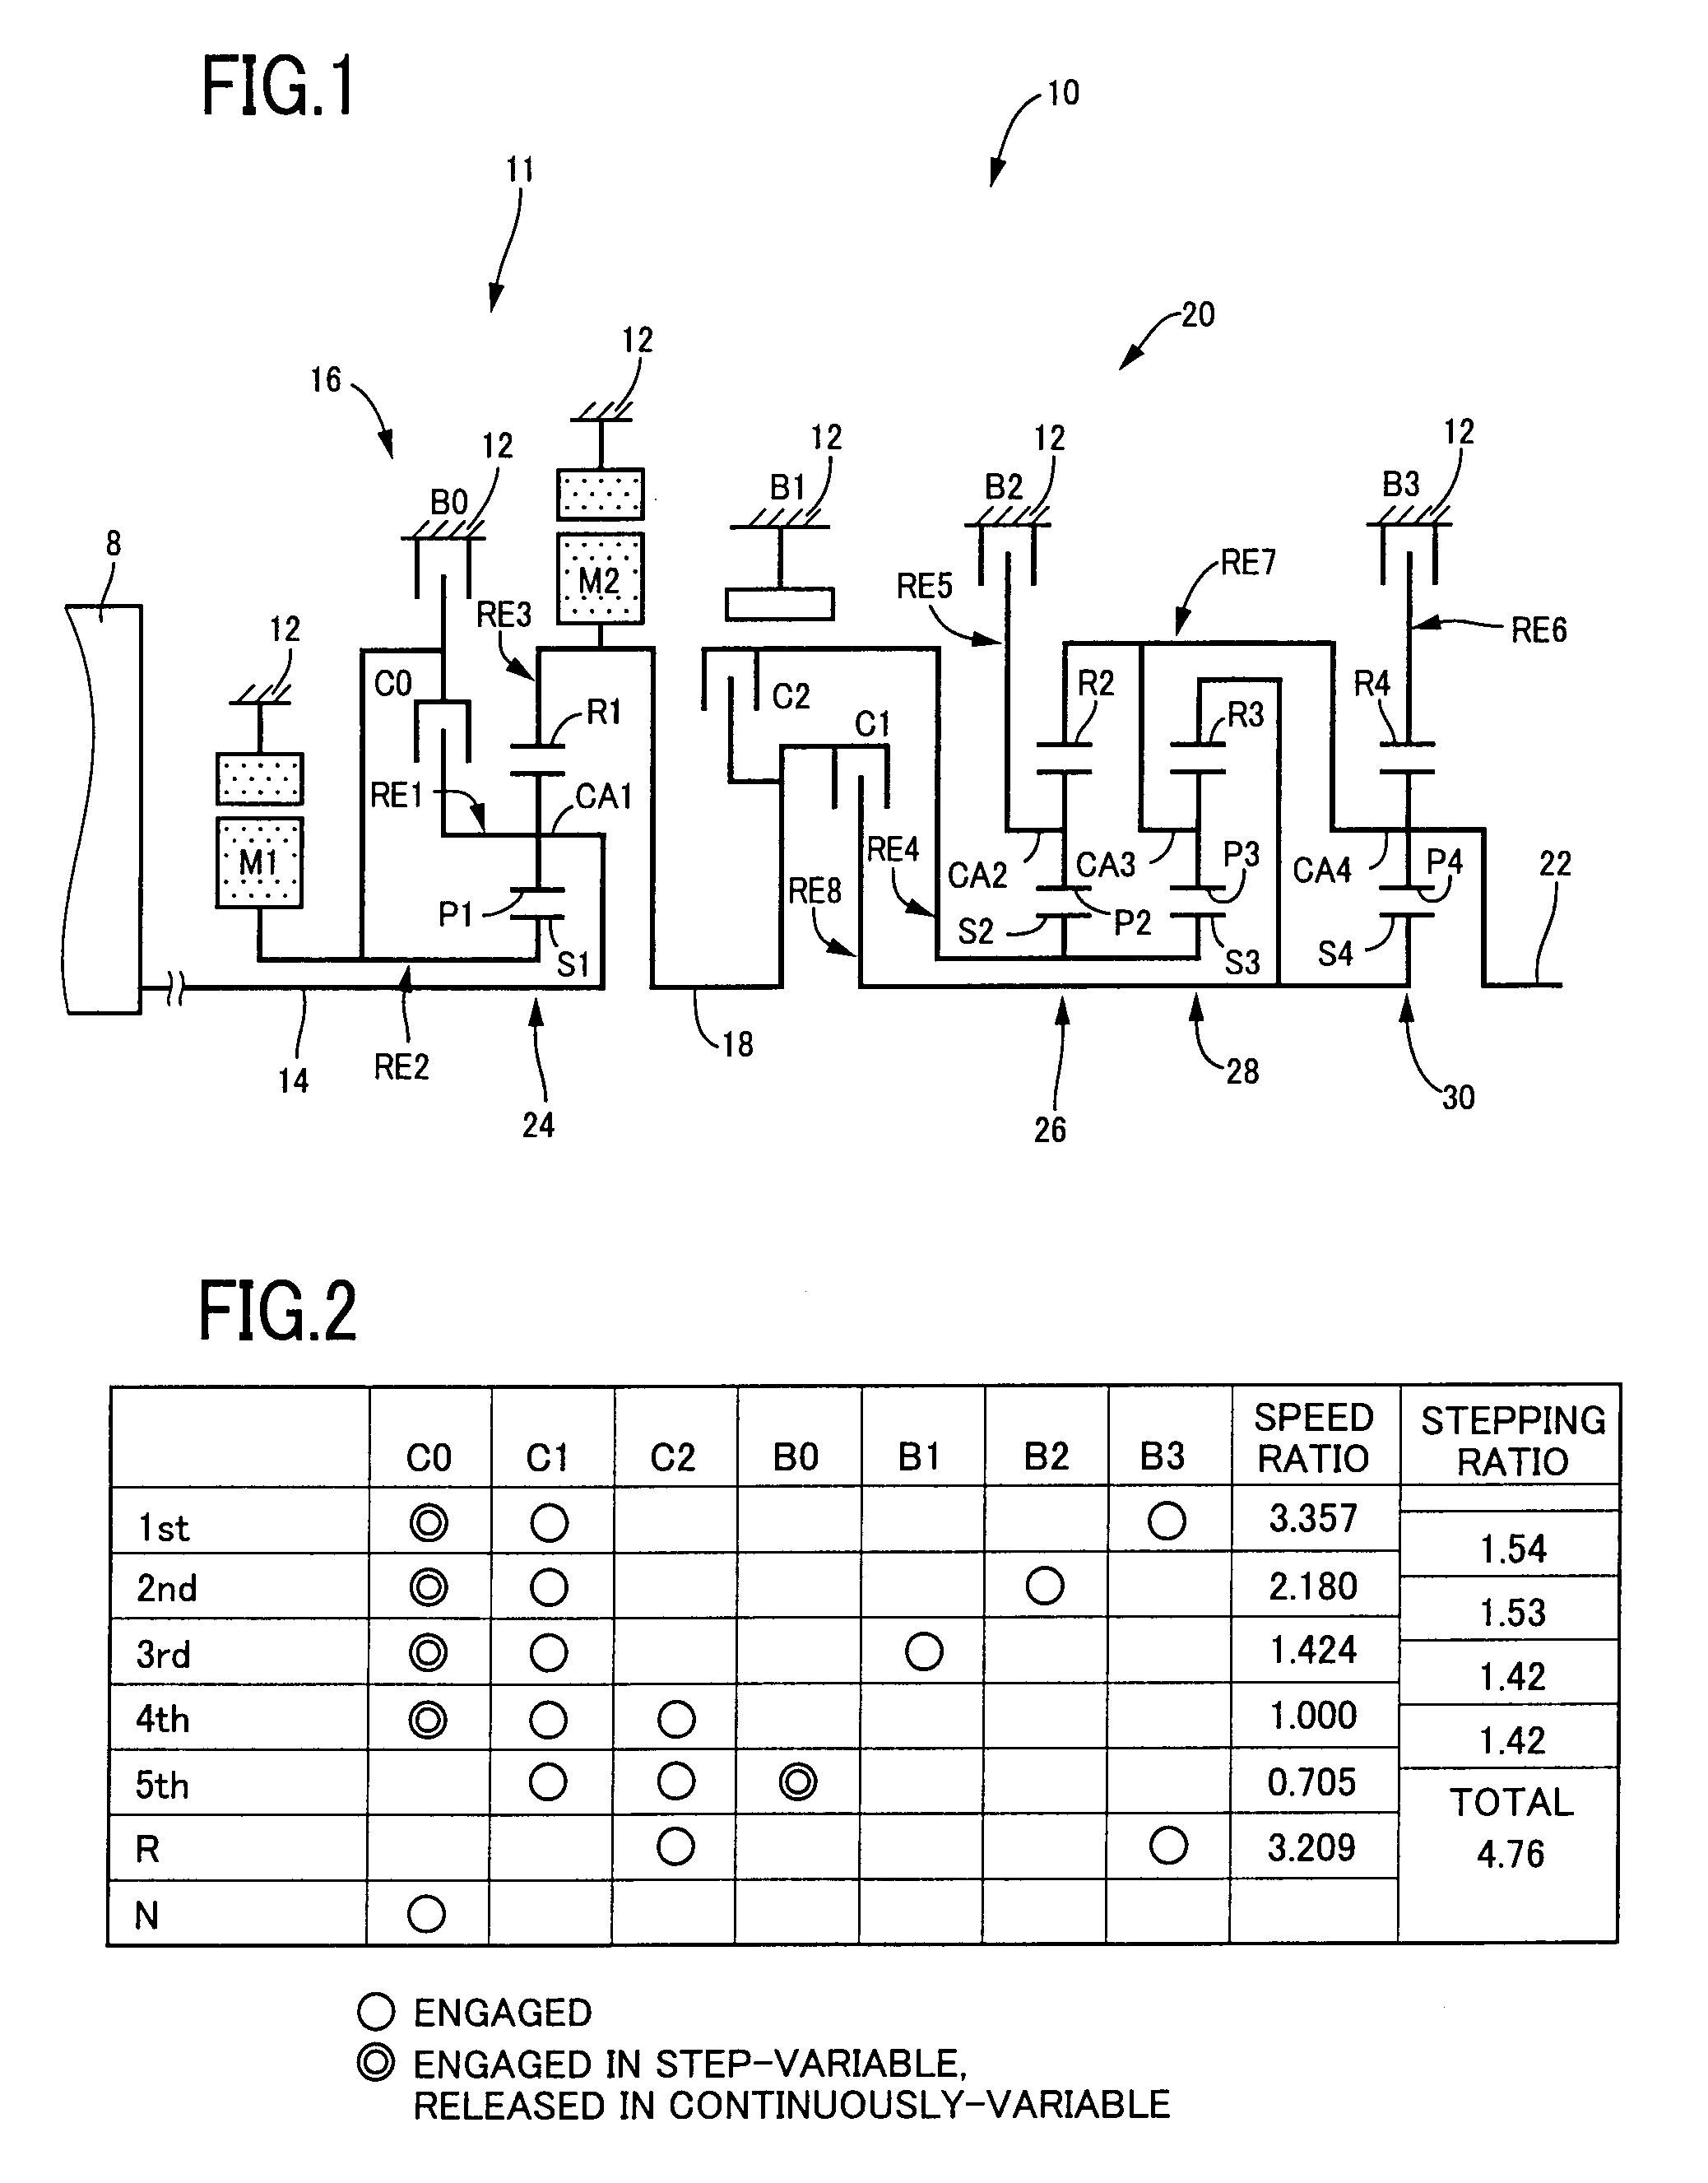 Controller of drive device for vehicle